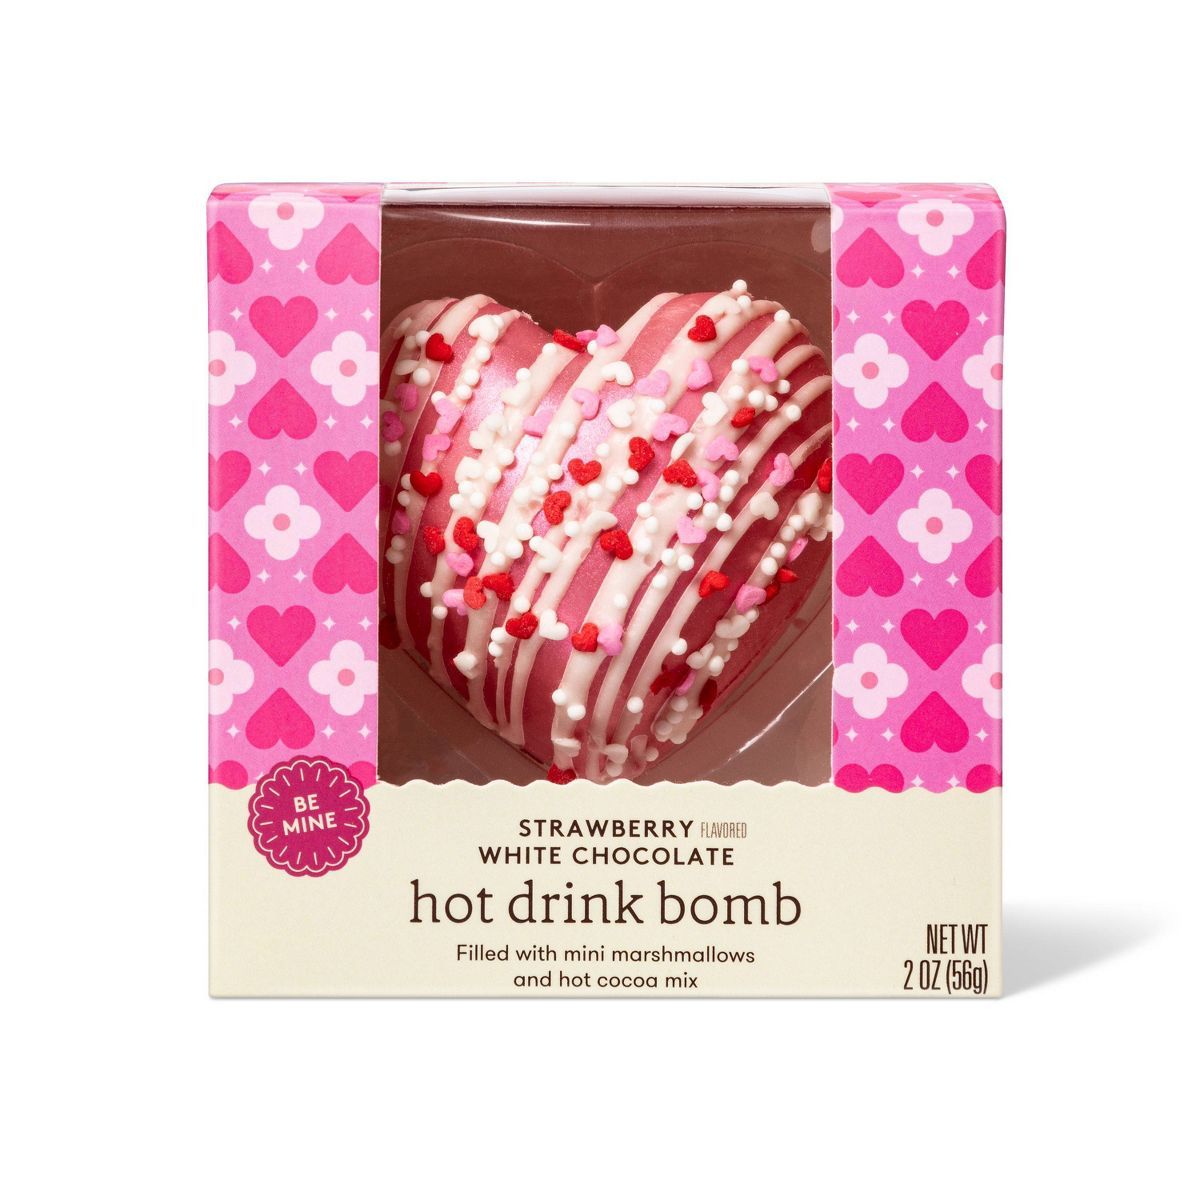 Valentine's Shimmery Heart Shaped Hot Cocoa Bomb Strawberry White Chocolate - 2oz - Favorite Day... | Target